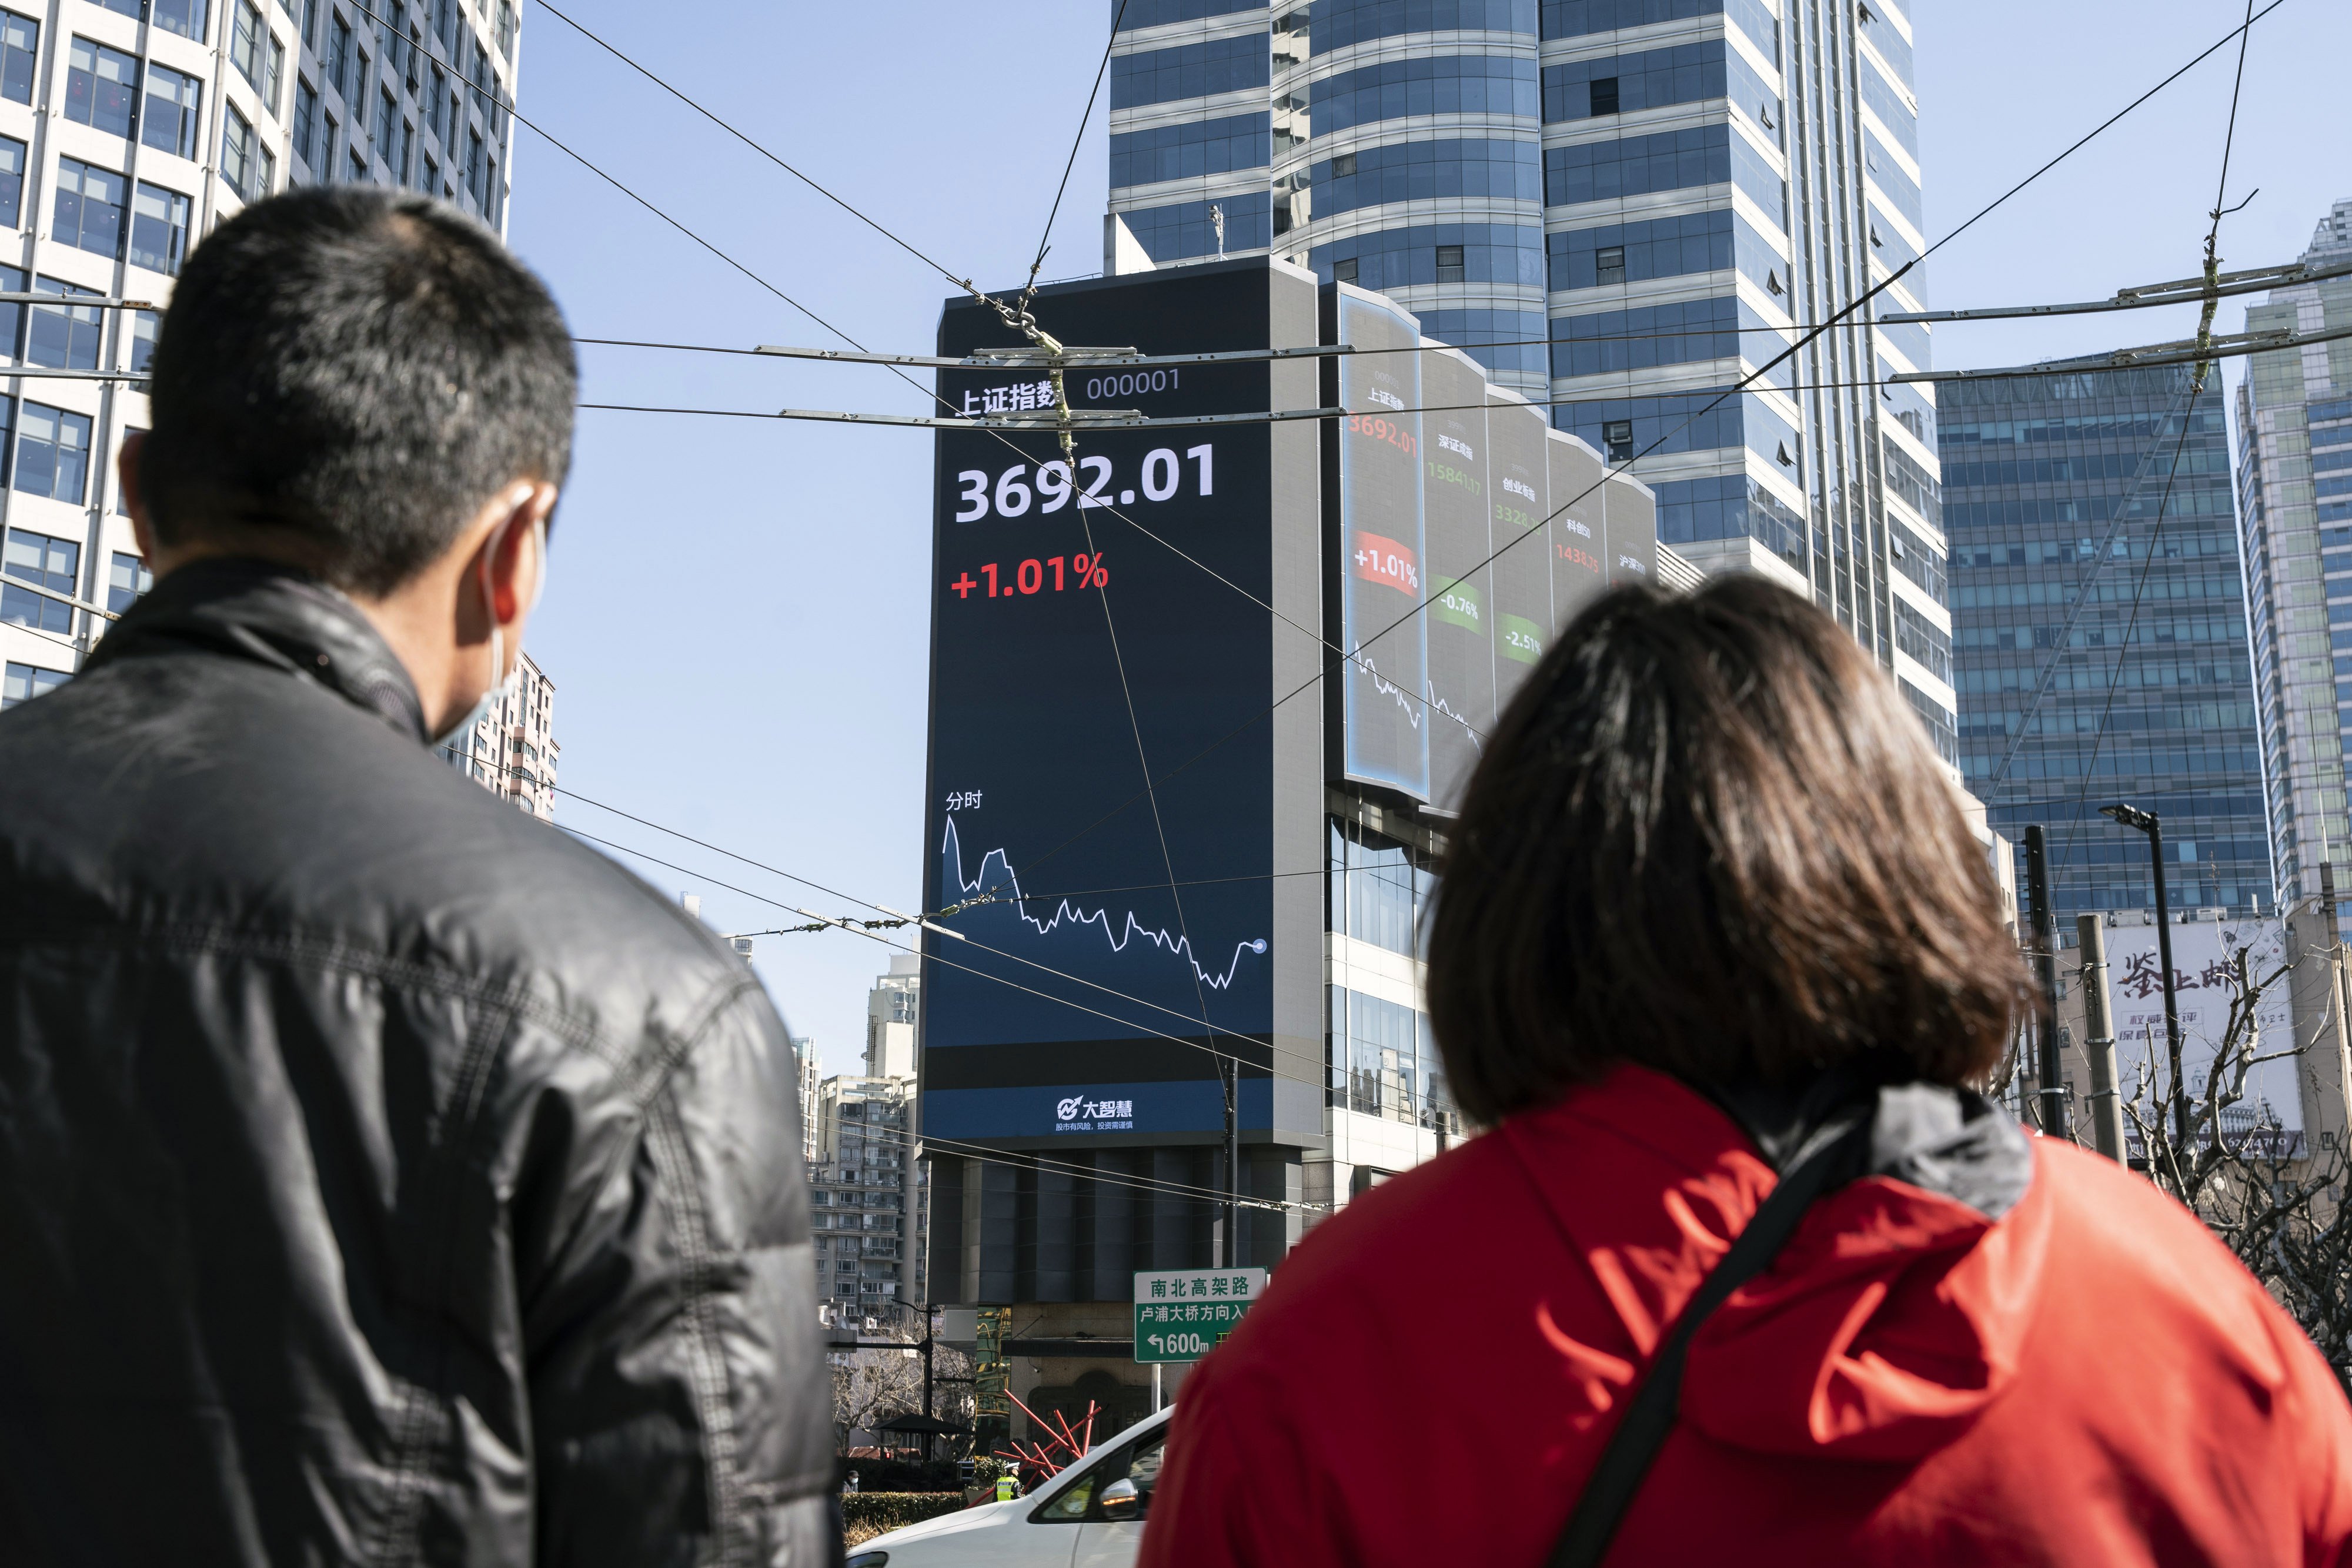 Pedestrians walk past a screen displaying stock prices in Shanghai.Photo: Bloomberg